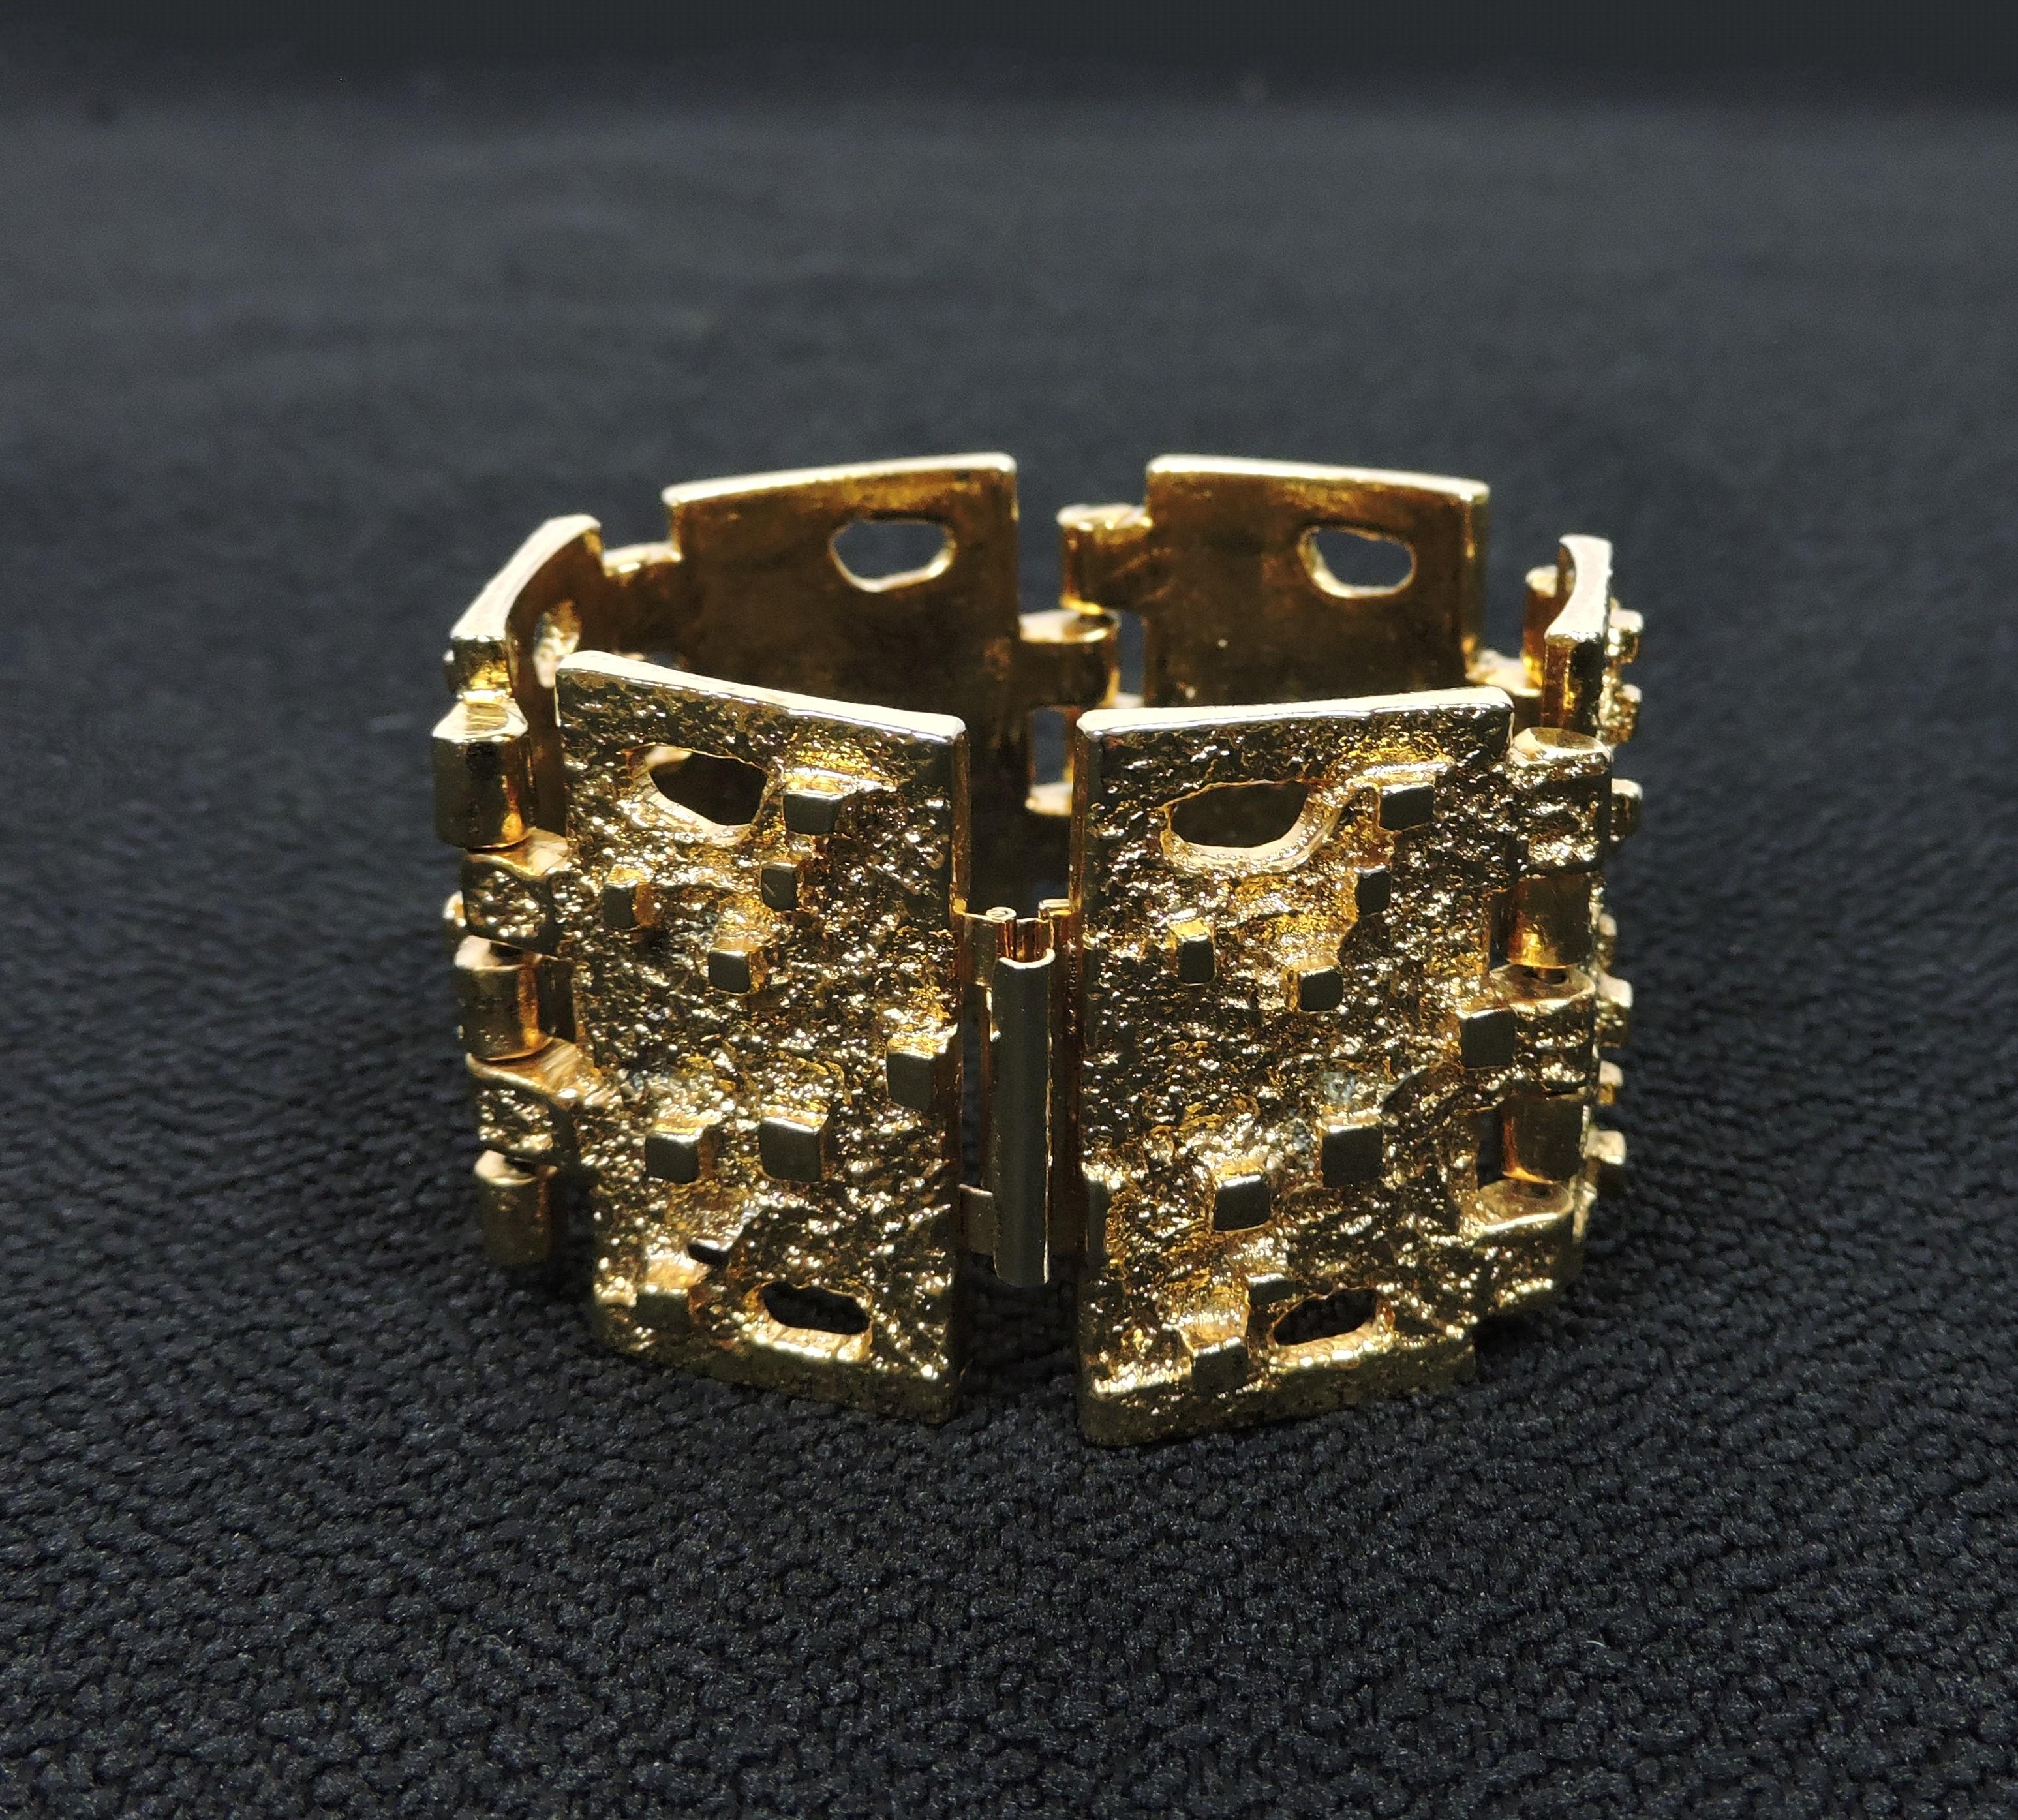 Striking and dramatic brutalist style sculptural gold tone bracelet by acclaimed Canadian jewelry artist, Robert Larin. The dimension when closed is 2.5 inches diameter. Made of hand cast pewter and signed R. Larin on the back.

From